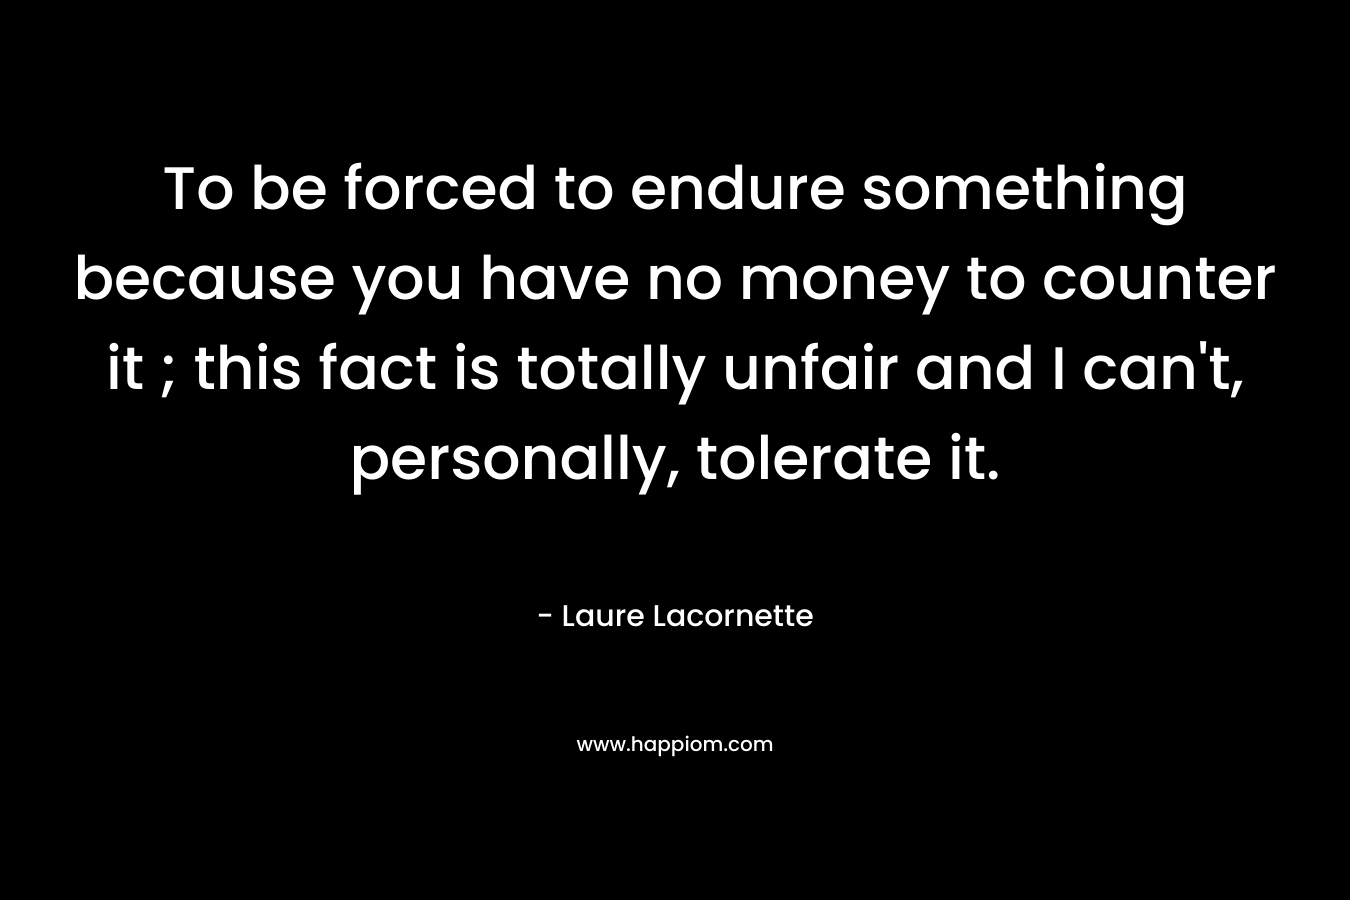 To be forced to endure something because you have no money to counter it ; this fact is totally unfair and I can’t, personally, tolerate it. – Laure Lacornette